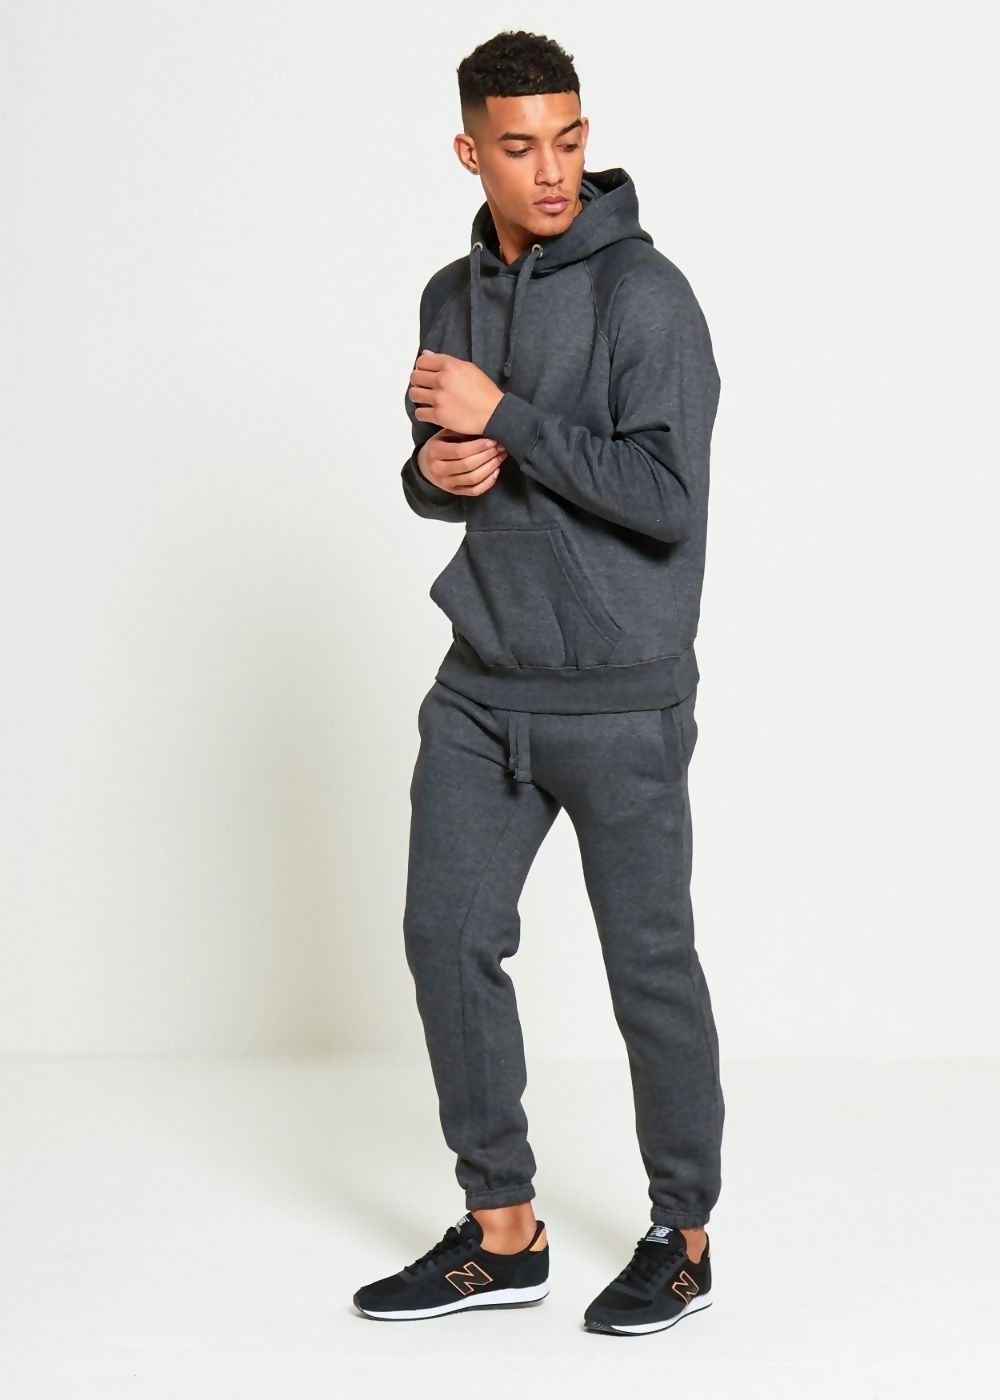 Charcoal Comfy Hooded Pullover Set